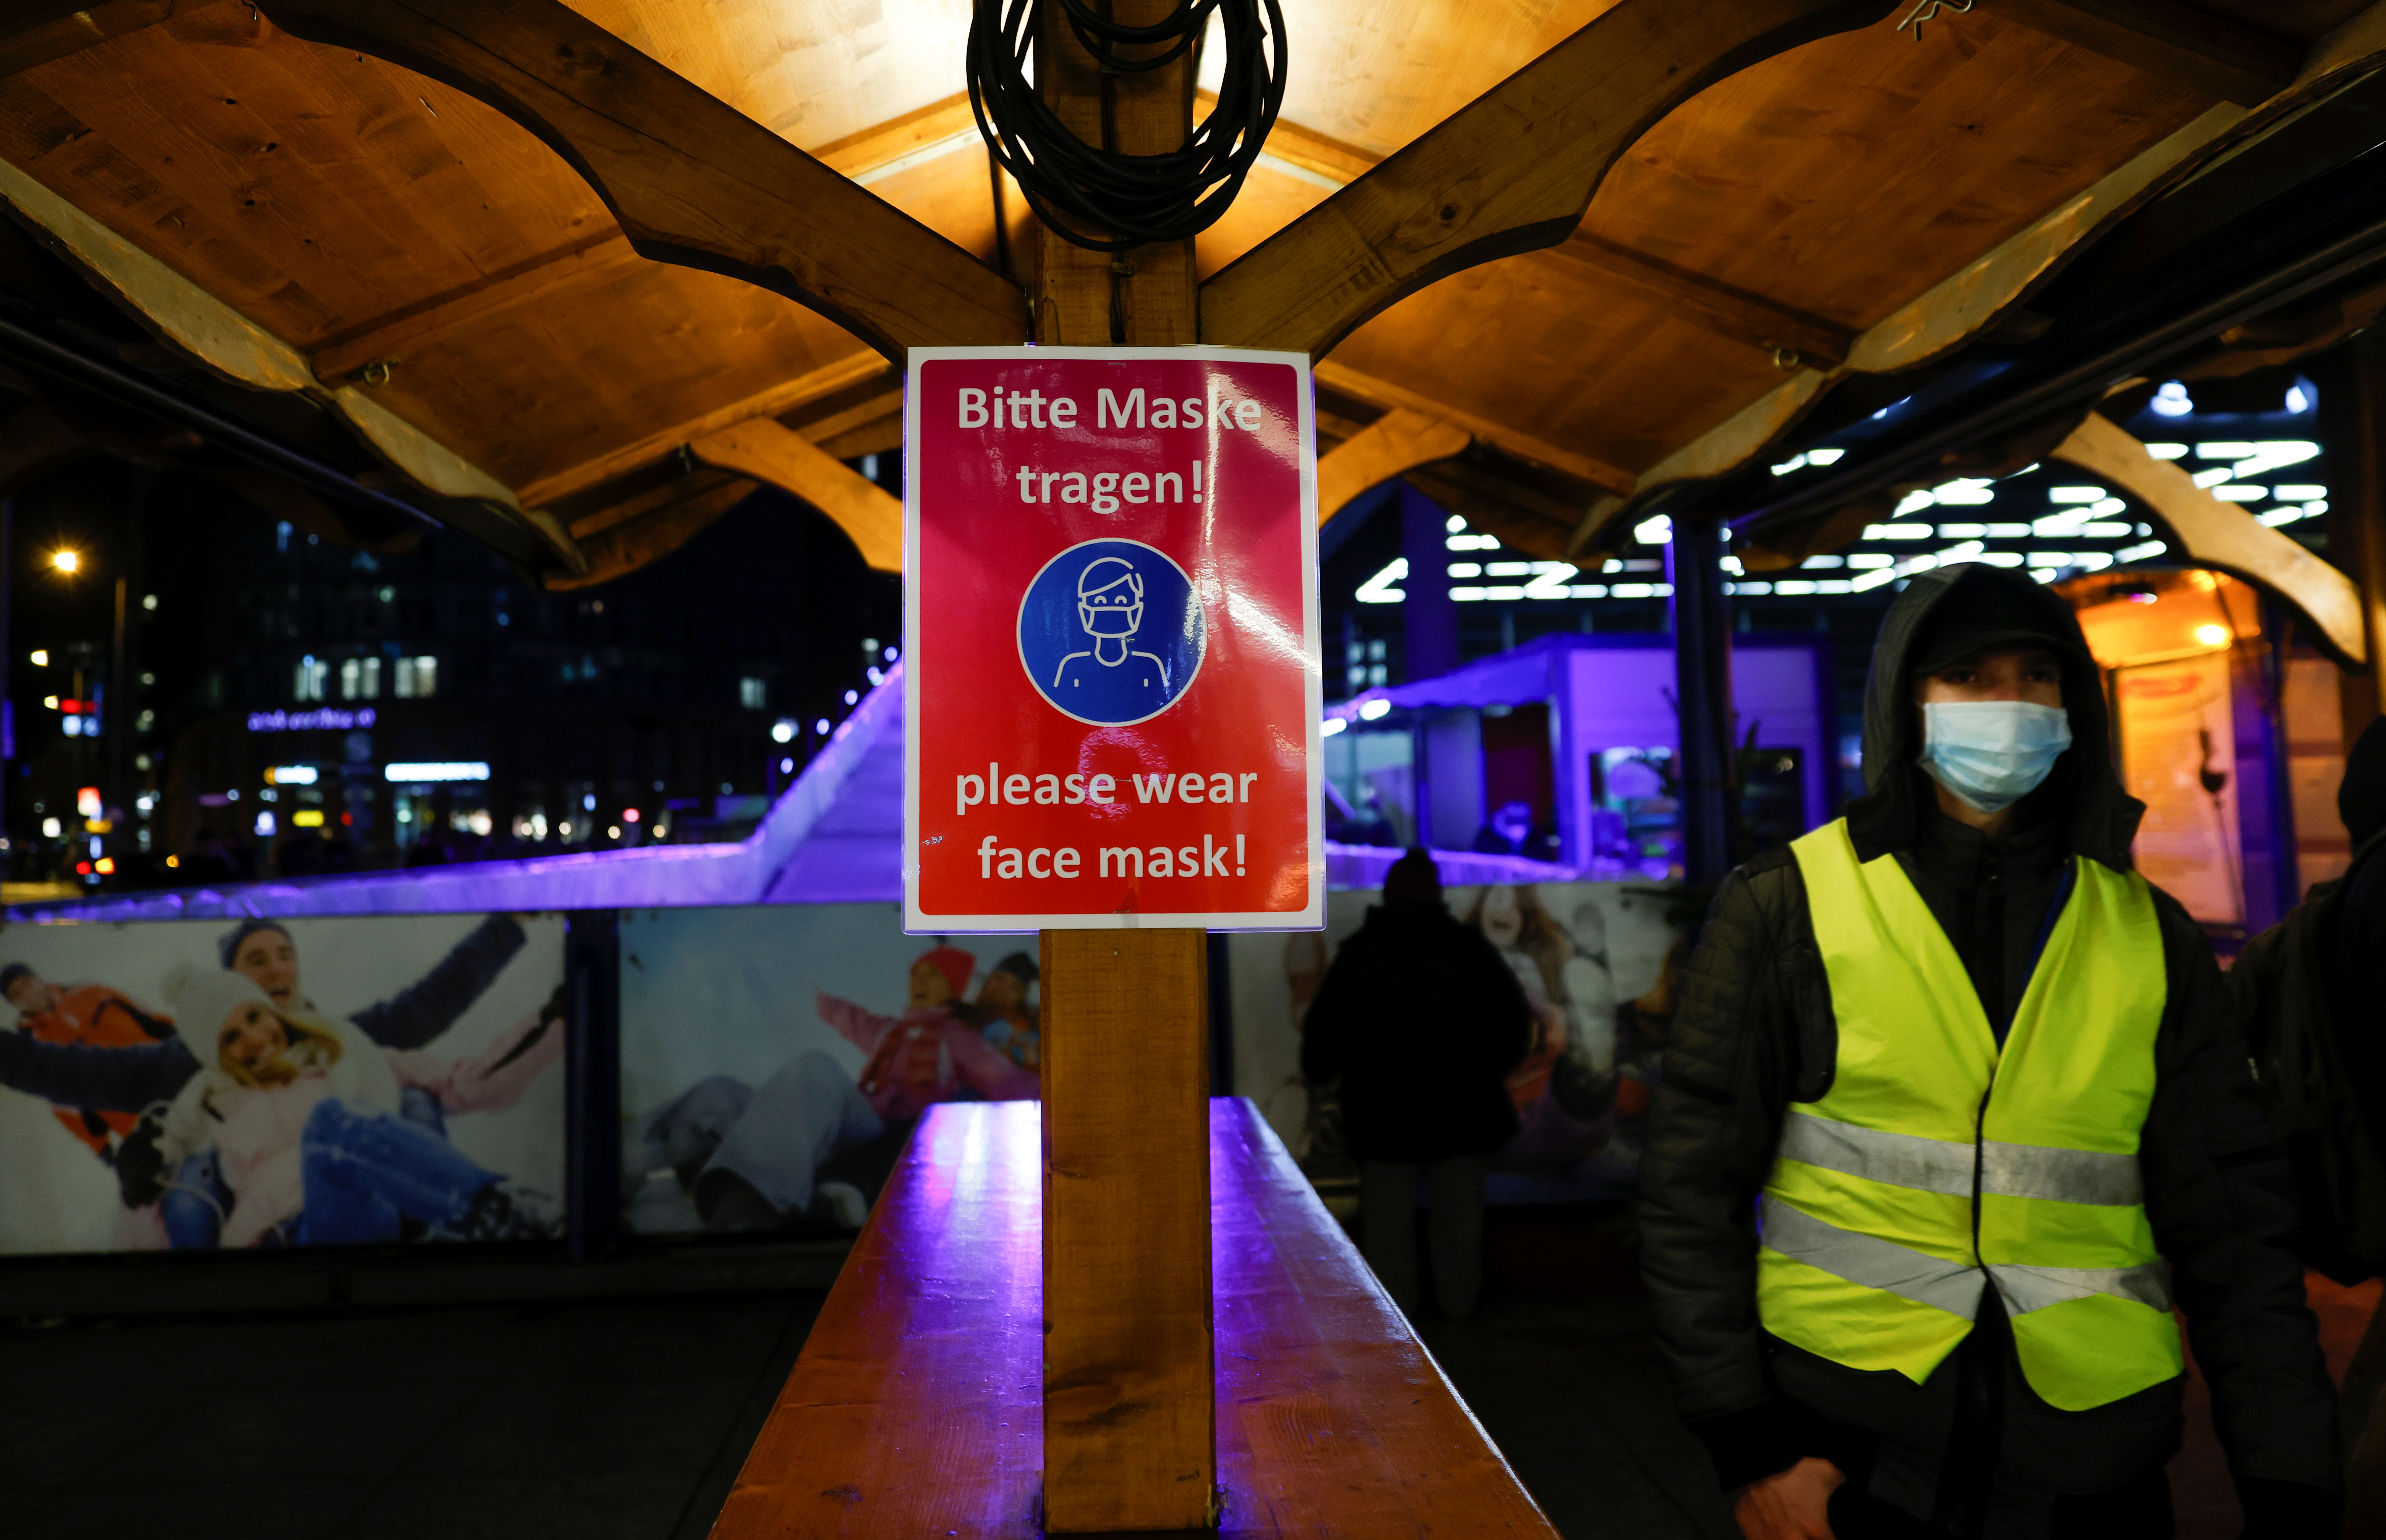 A sign requesting visitors to wear face masks is seen at a Christmas market as the spread of the coronavirus disease (COVID-19) continues in Berlin, Germany, November 30, 2021. REUTERS/Michele Tantussi/file photo